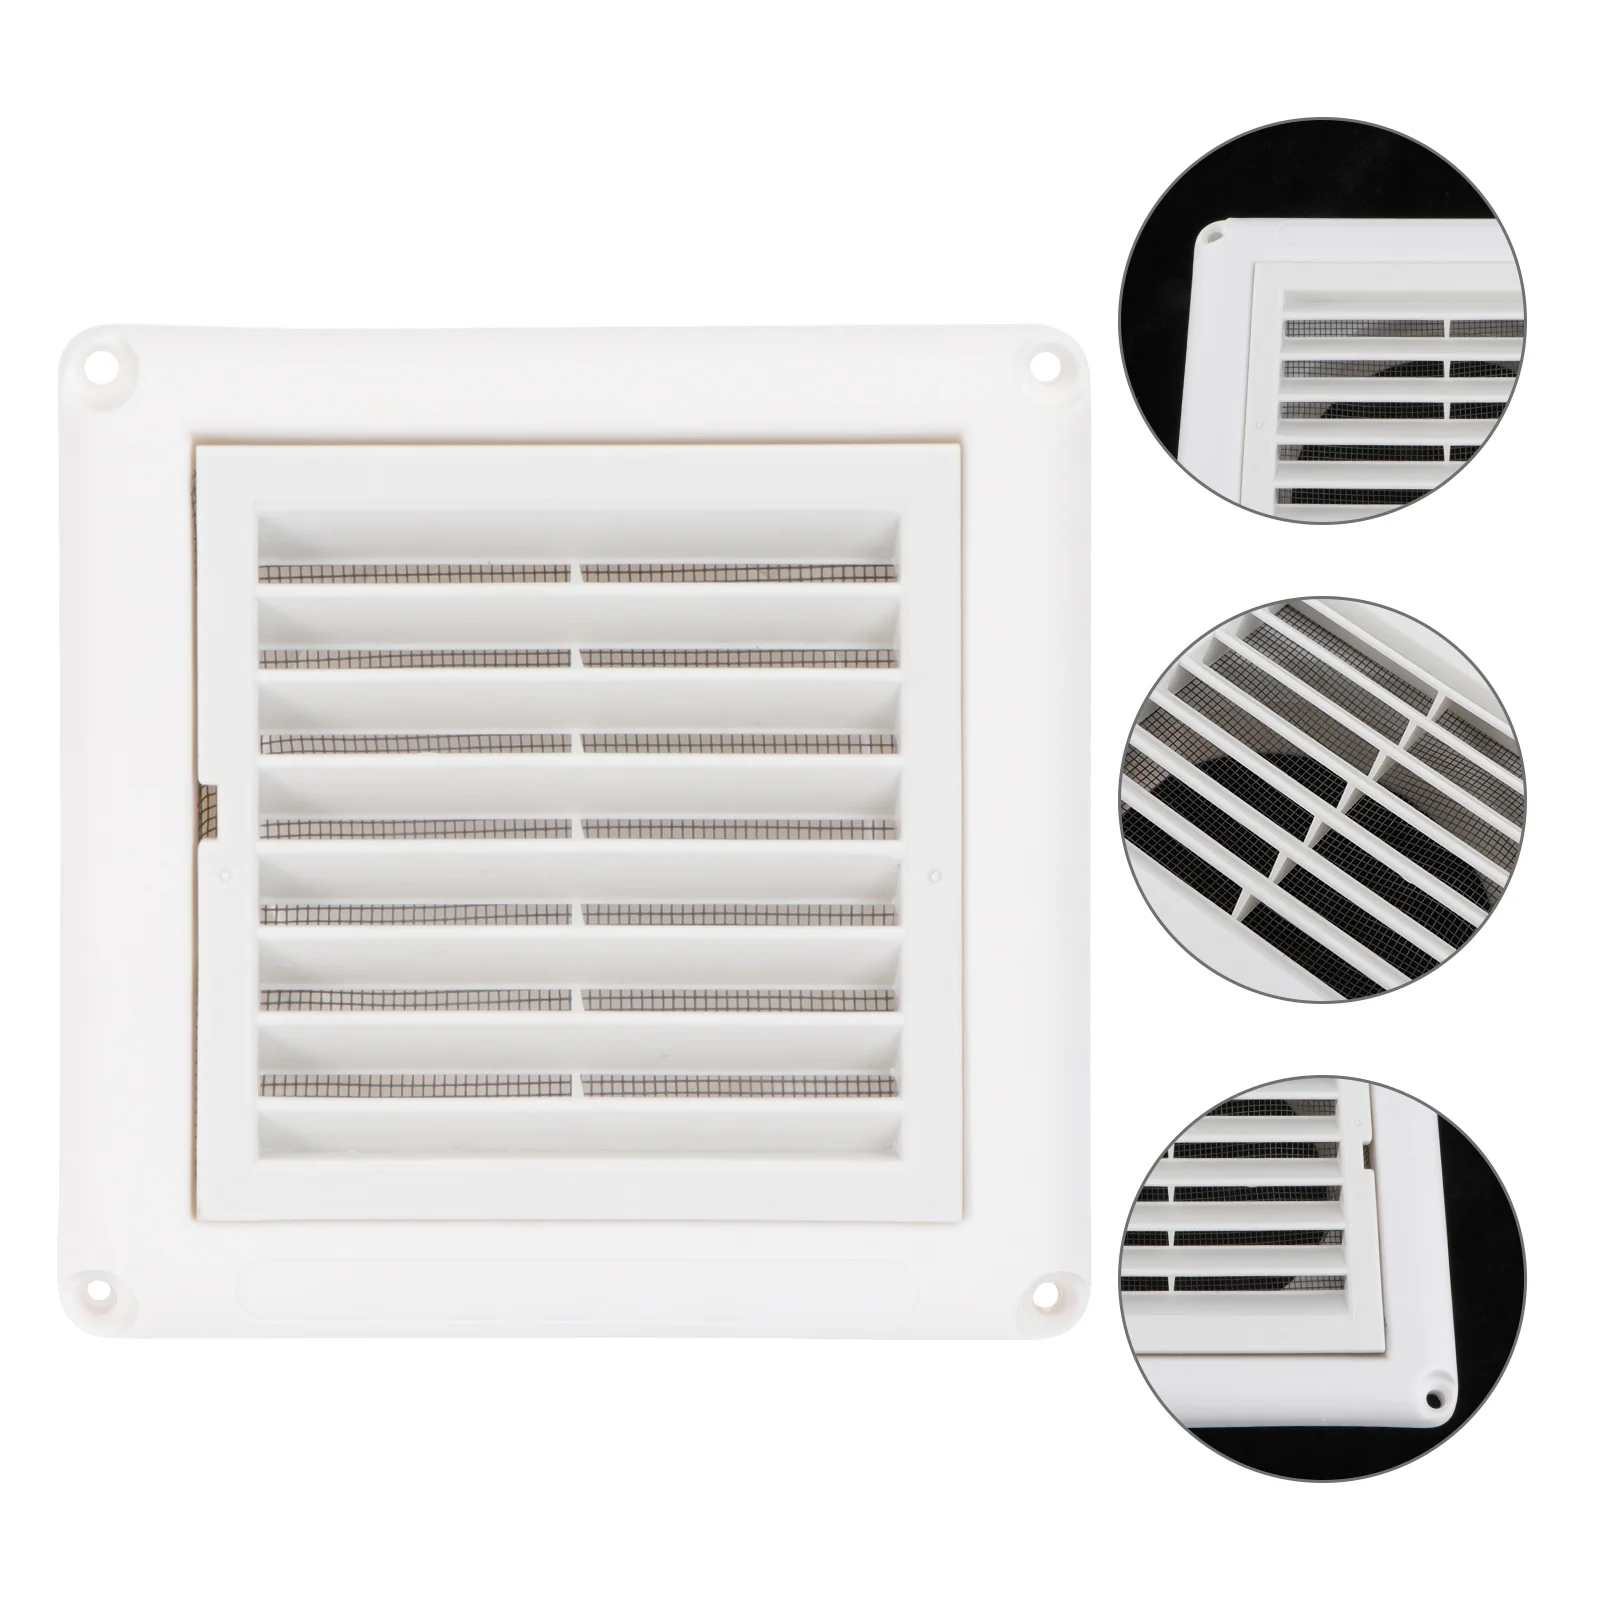 

Air Vent Covers for Walls, Air Cover Ventilation Grill Cover Wall Vents Interior Walls Wall Vent Cover Air Brick Covers